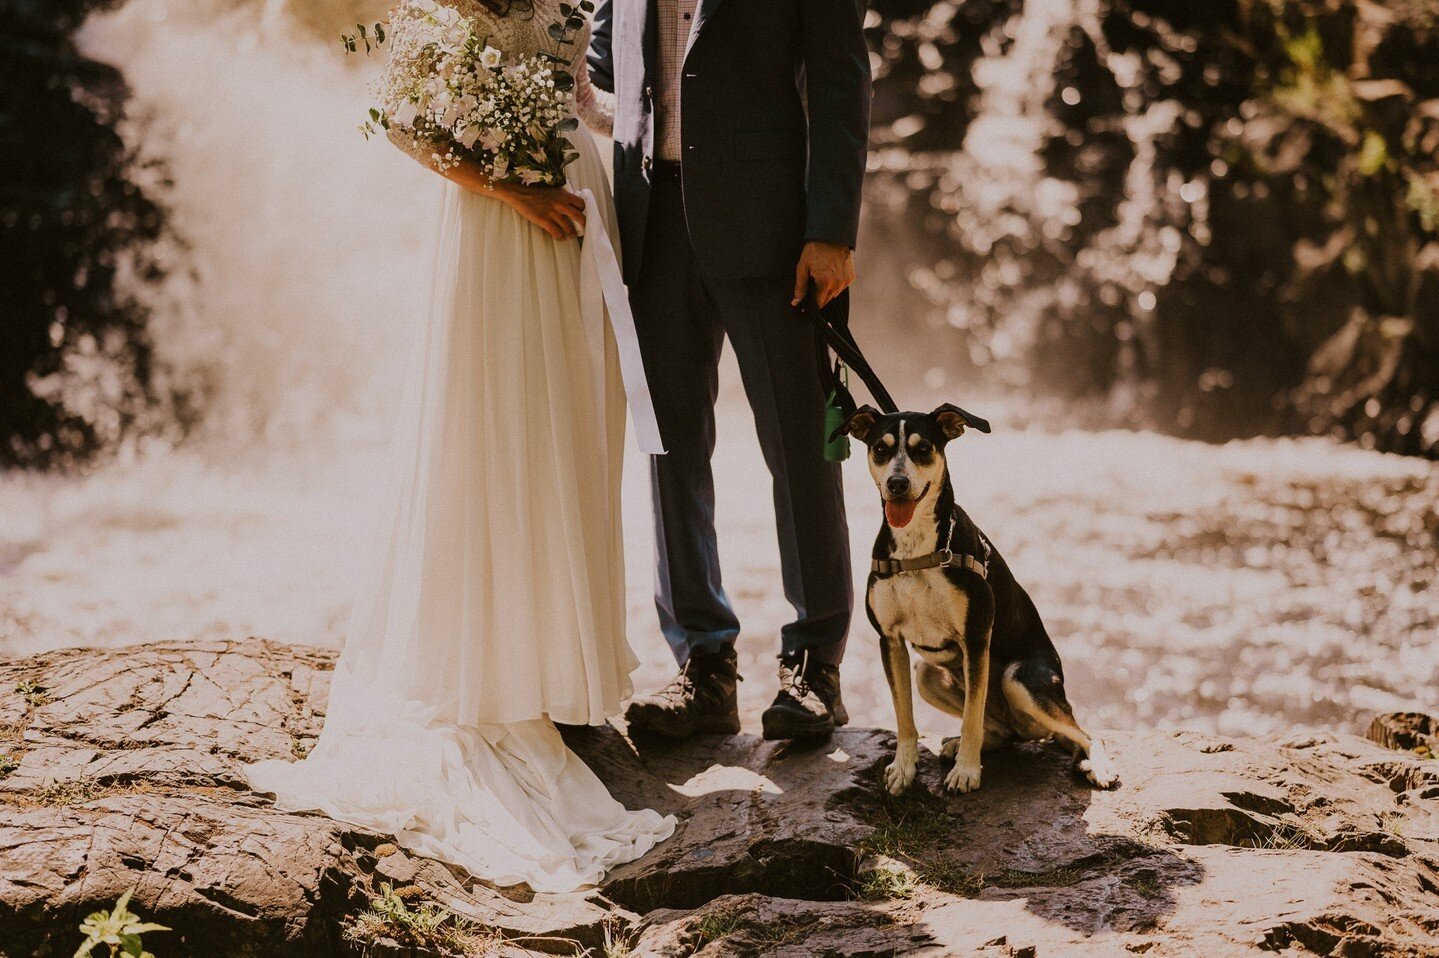 This week, I'm sharing how to include your dog in your elopement day, along with tips to make sure they are safe and comfortable. ⁠
⁠
Idea #3: GoPro Dog⁠
⁠
One of my favorite ideas for including your dog in your day is to put a GoPro harness on them 